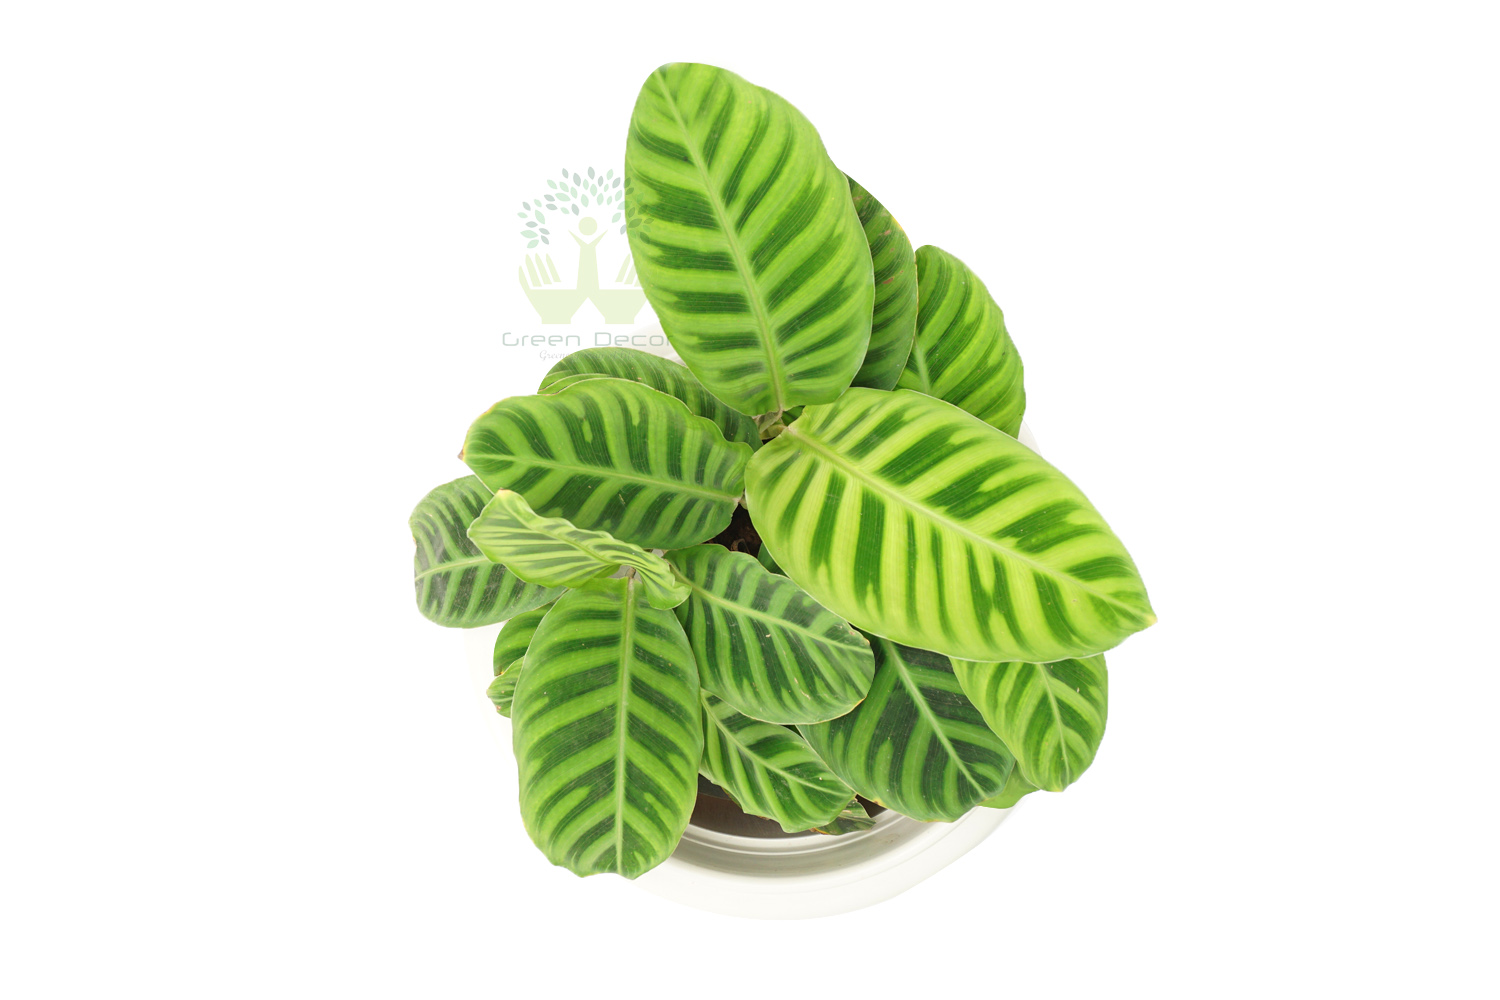 Buy Zebra Plant Top View, White Pots and Seeds in Delhi NCR by the best online nursery shop Greendecor.